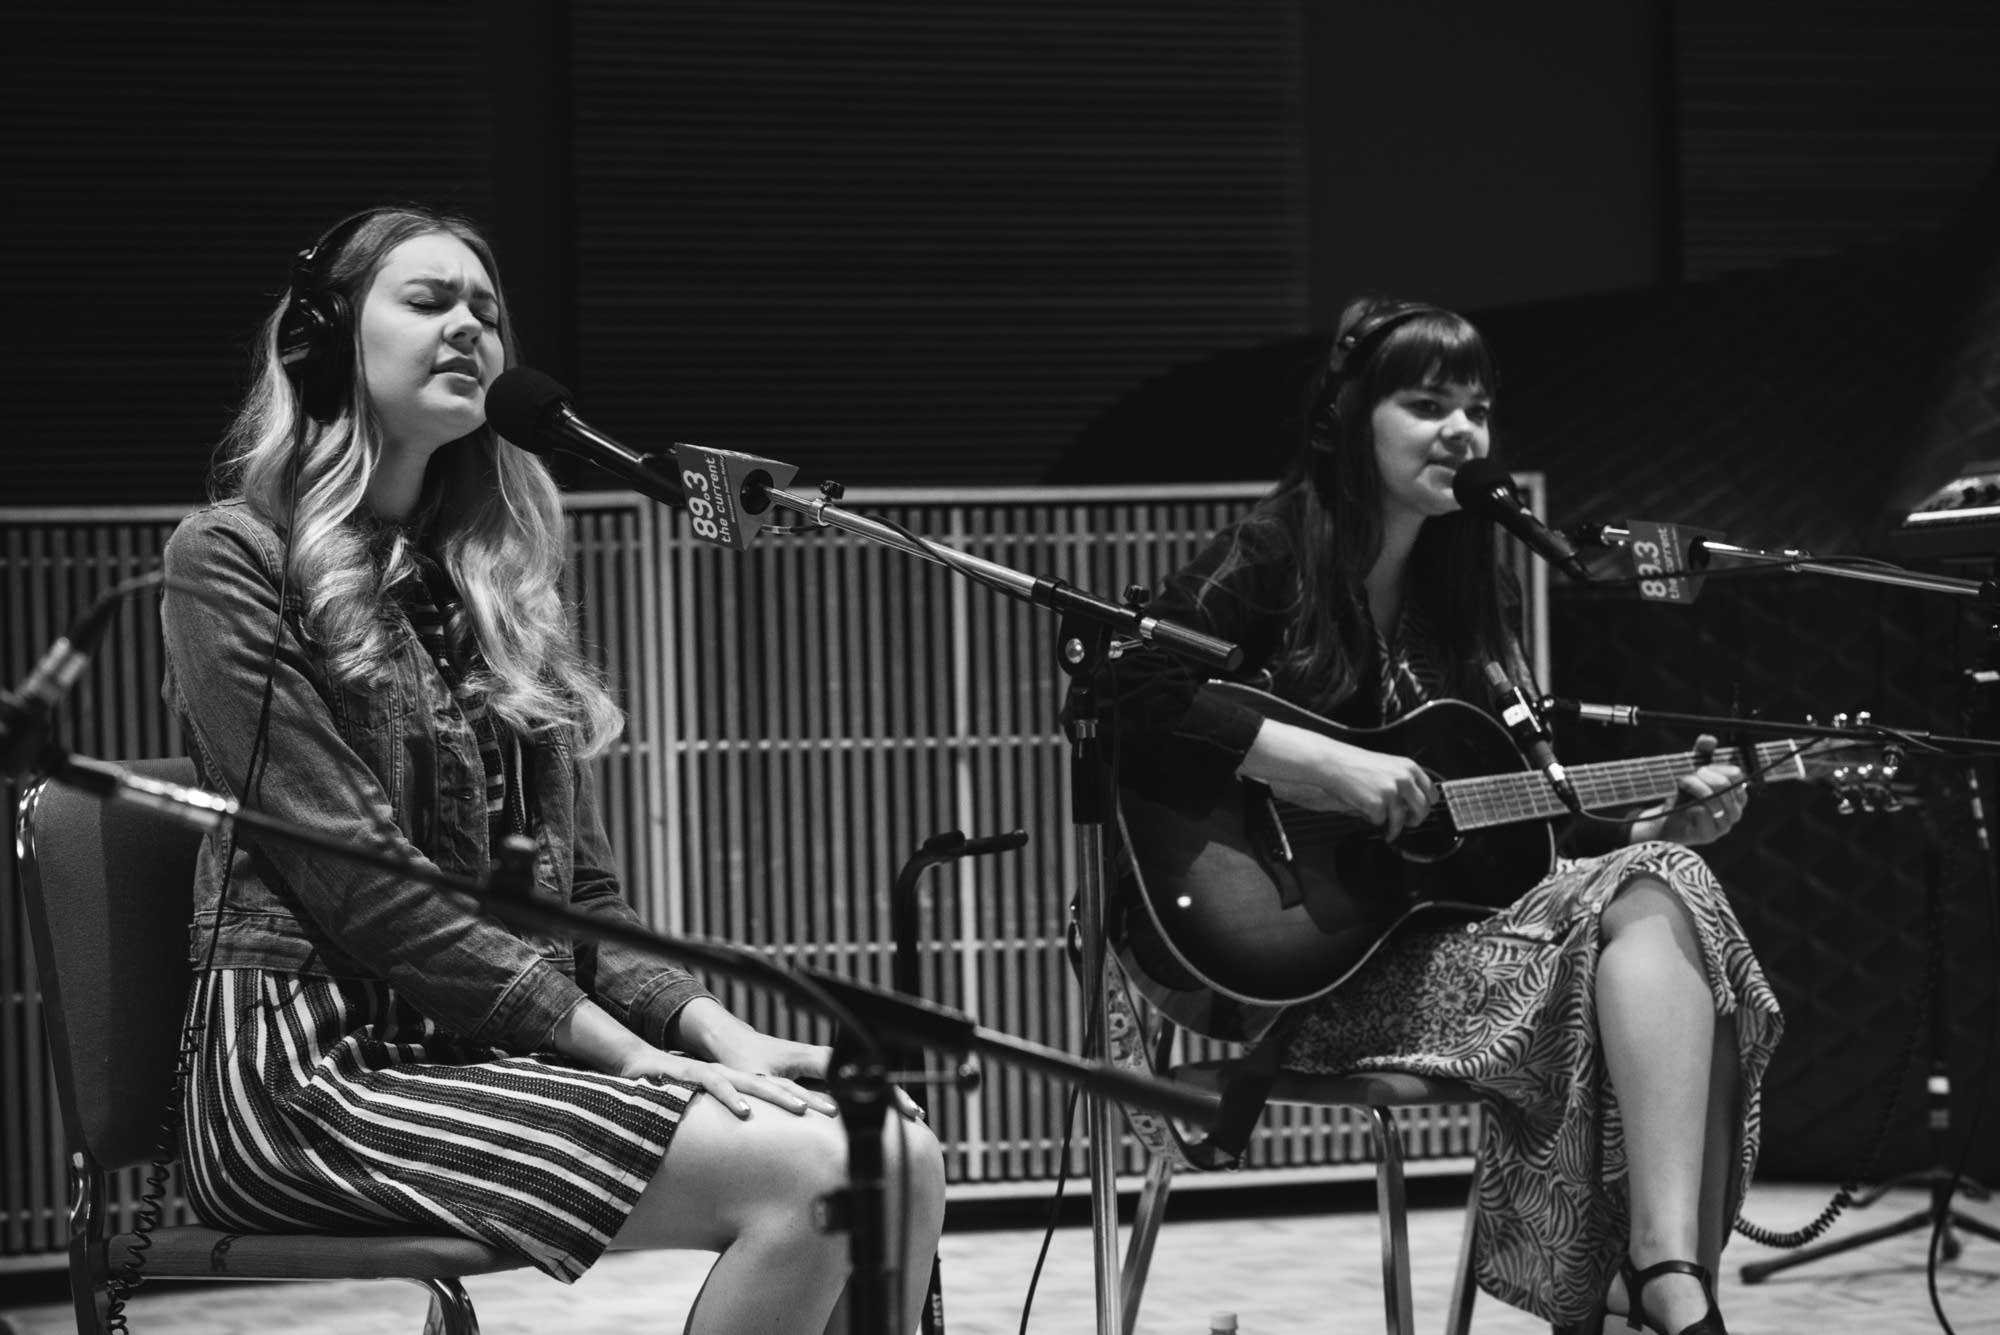 First Aid Kit perform in The Current studio 2000x1340